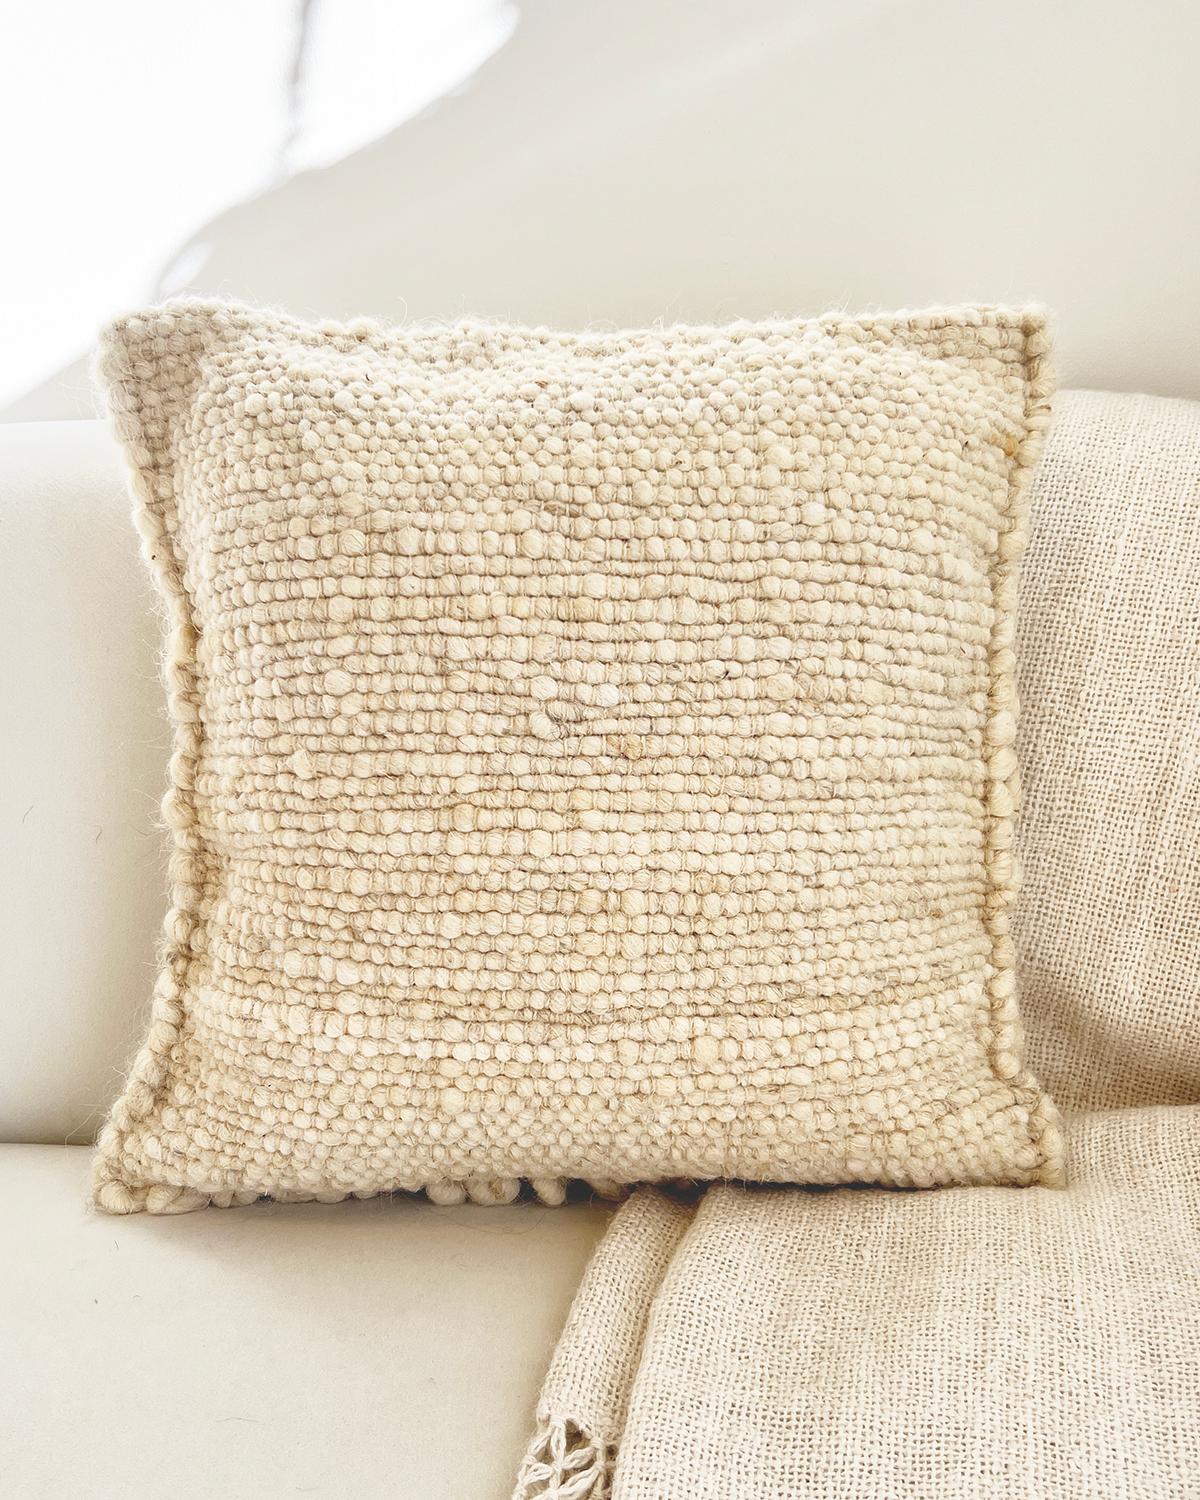 Portuguese Fatima Bobble Throw Pillow in Cream White made from 100% sheep wool - 20